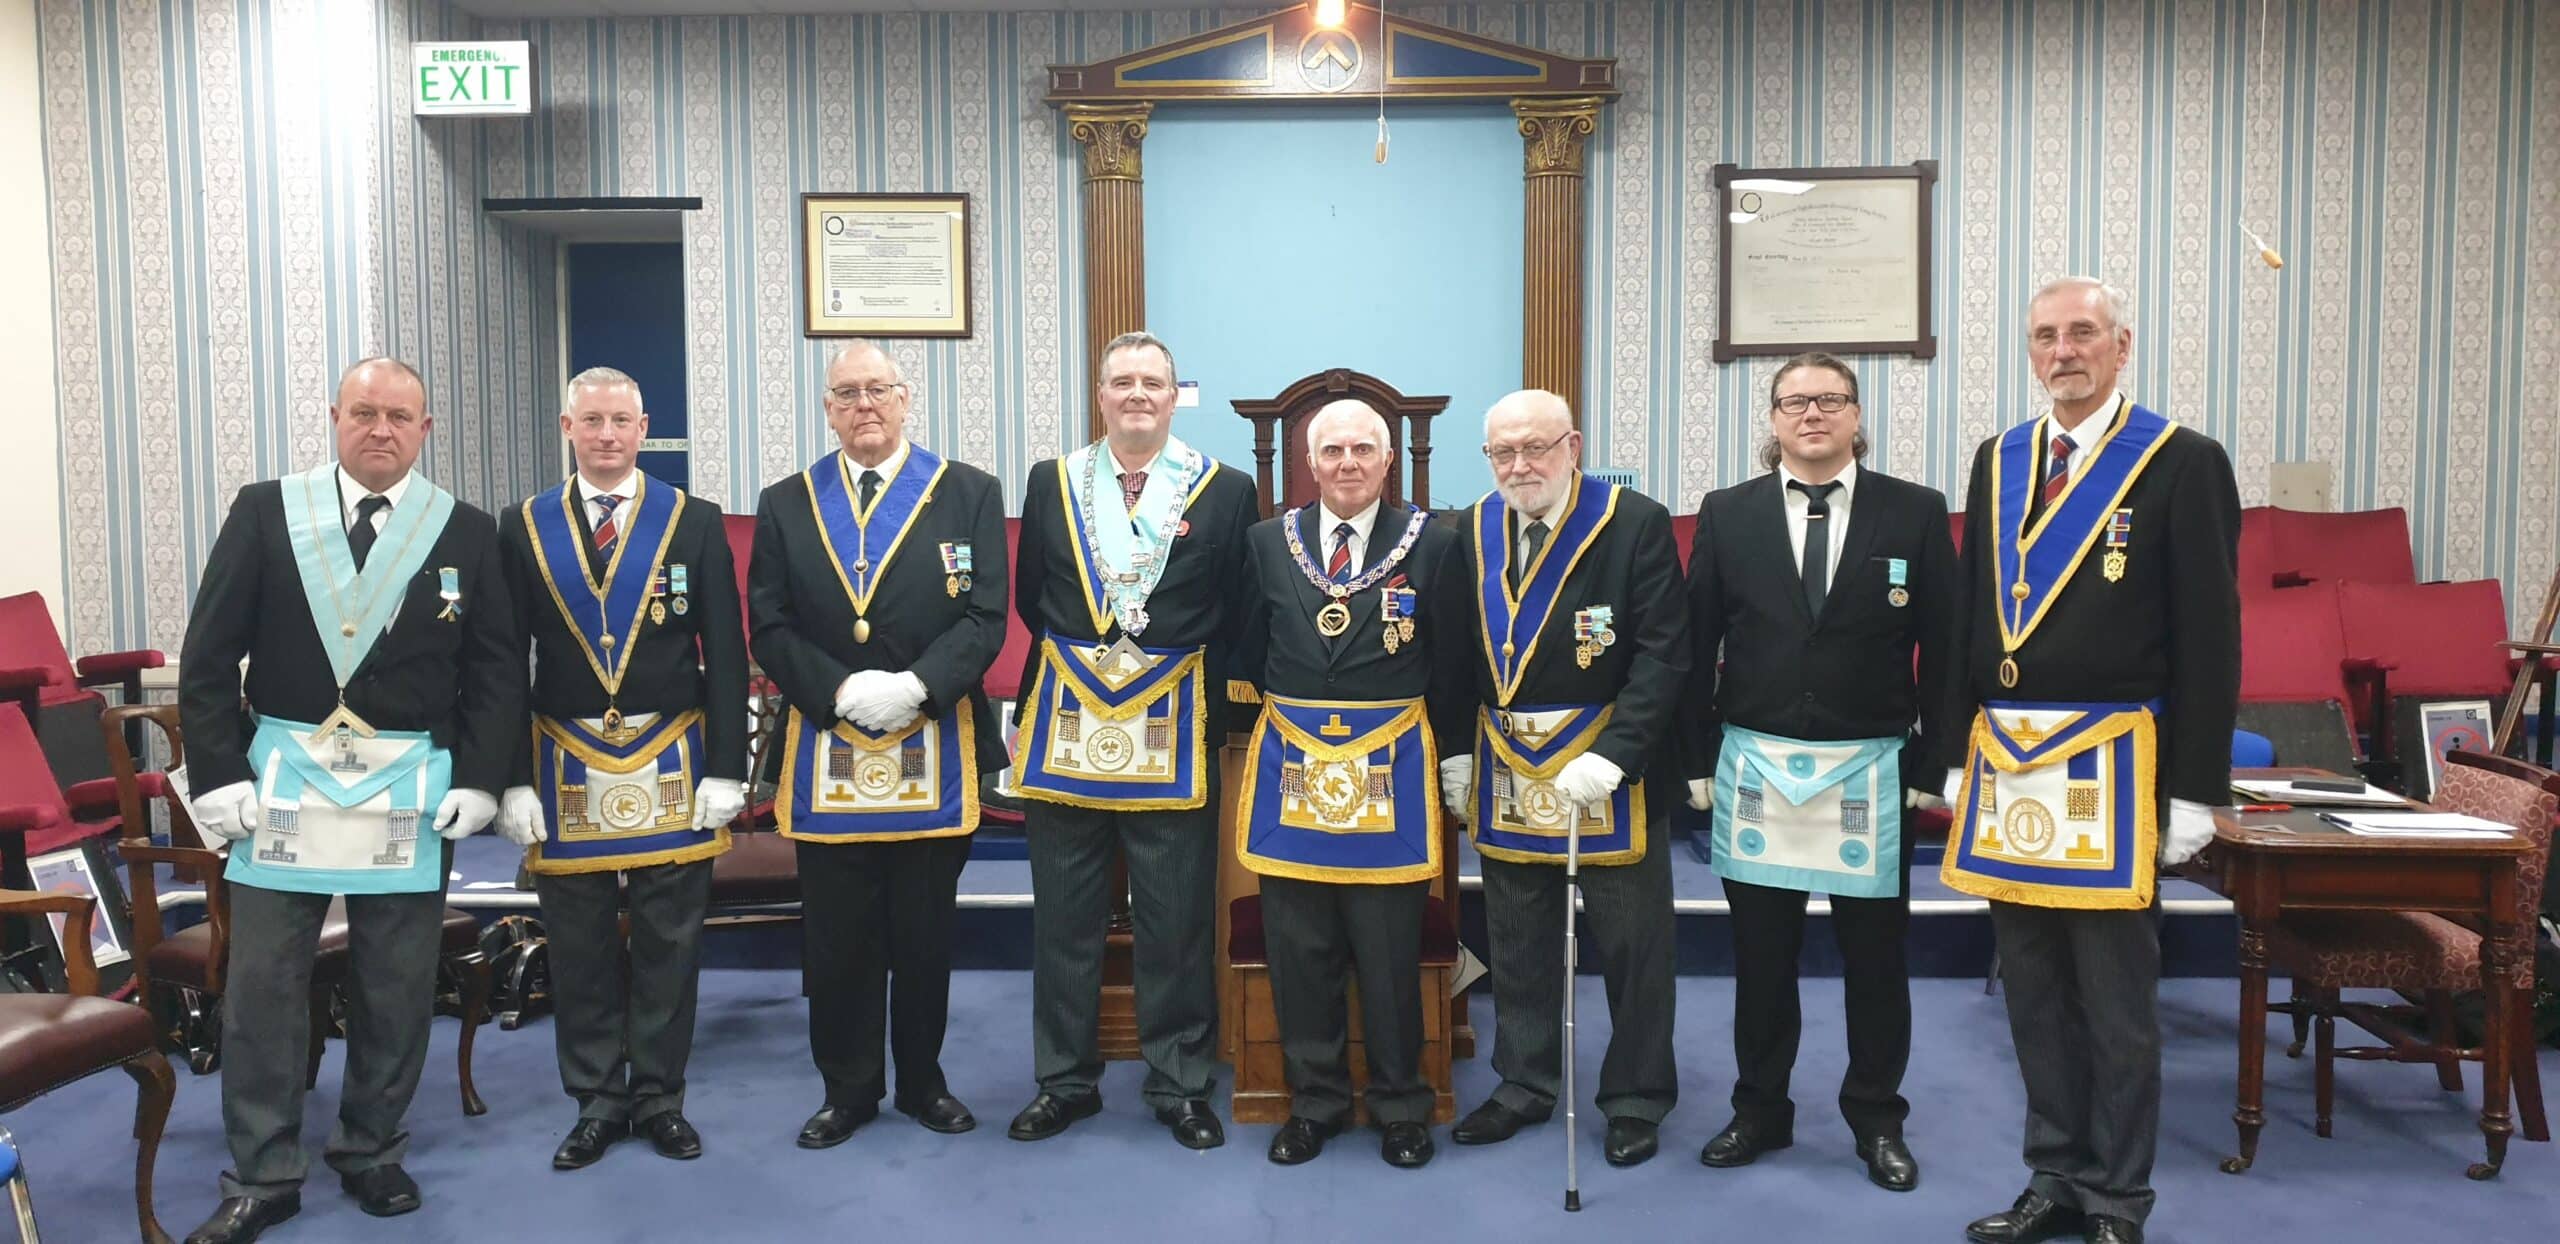 Celebrating 110 years of Coronation Lodge 3479 at Their Final Meeting